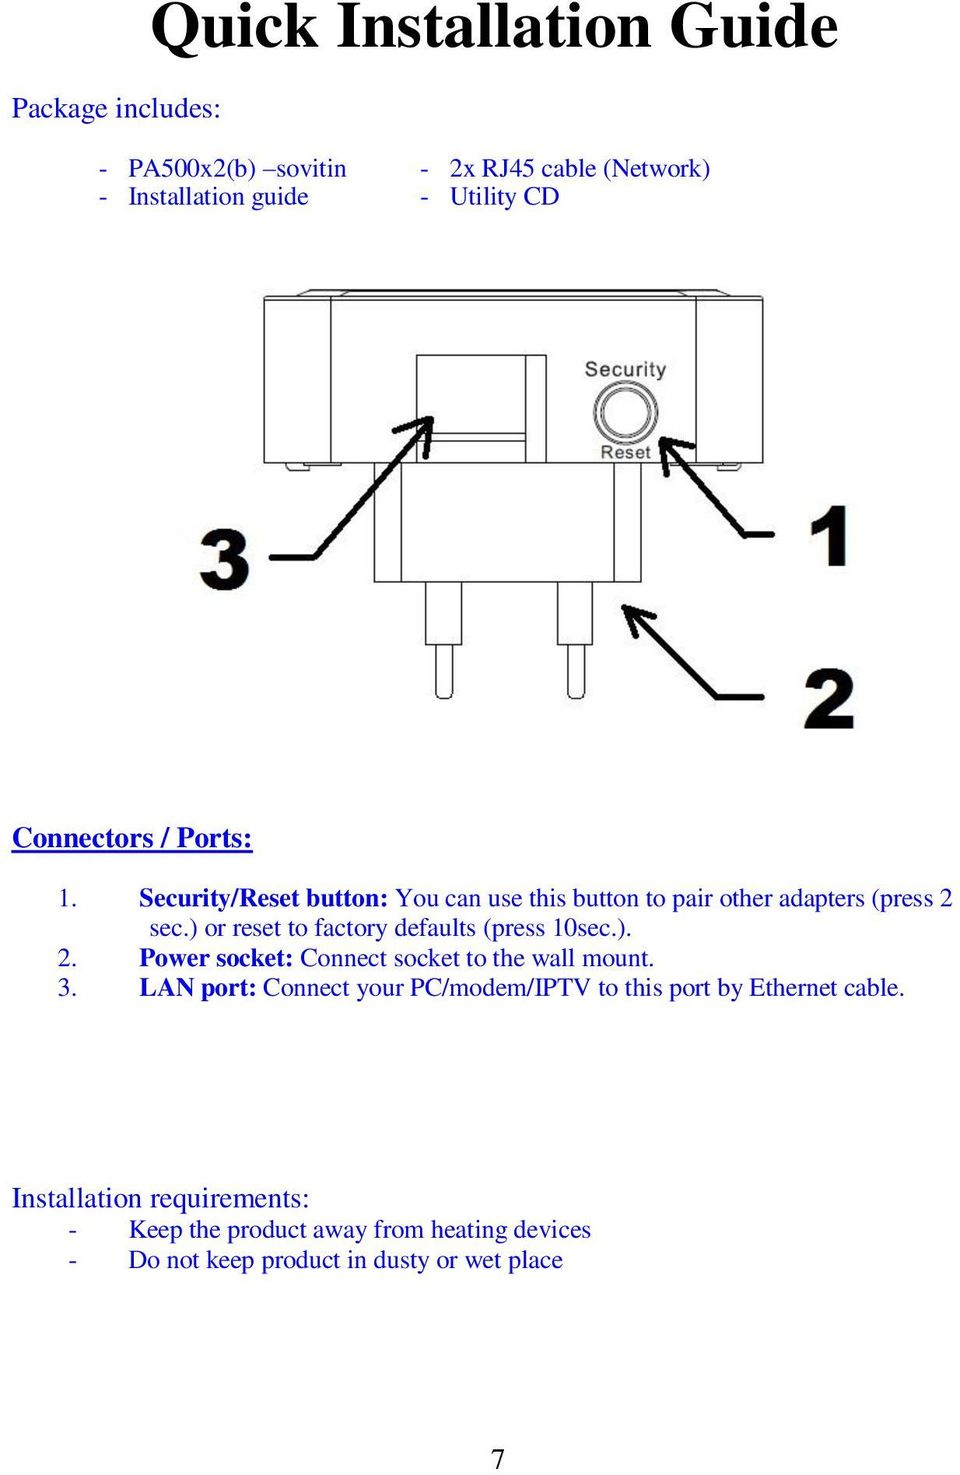 ) or reset to factory defaults (press 10sec.). 2. Power socket: Connect socket to the wall mount. 3.